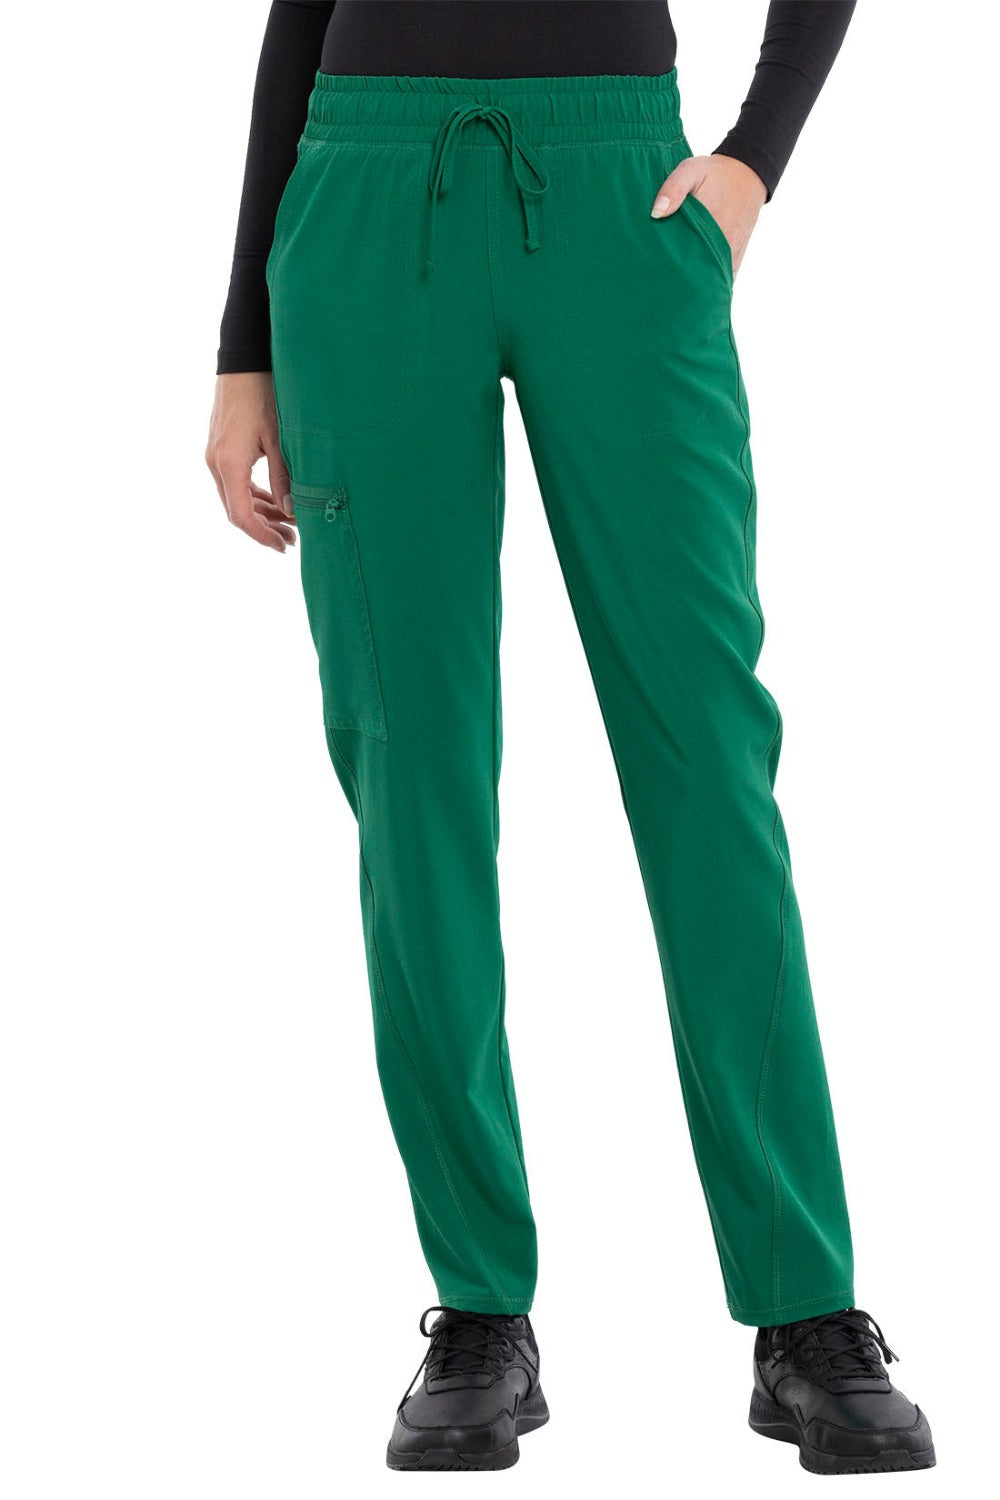 Cherokee Allura Tall Scrub Pant Mid Rise Tapered Leg Drawstring in Hunter at Parker's Clothing and Shoes.